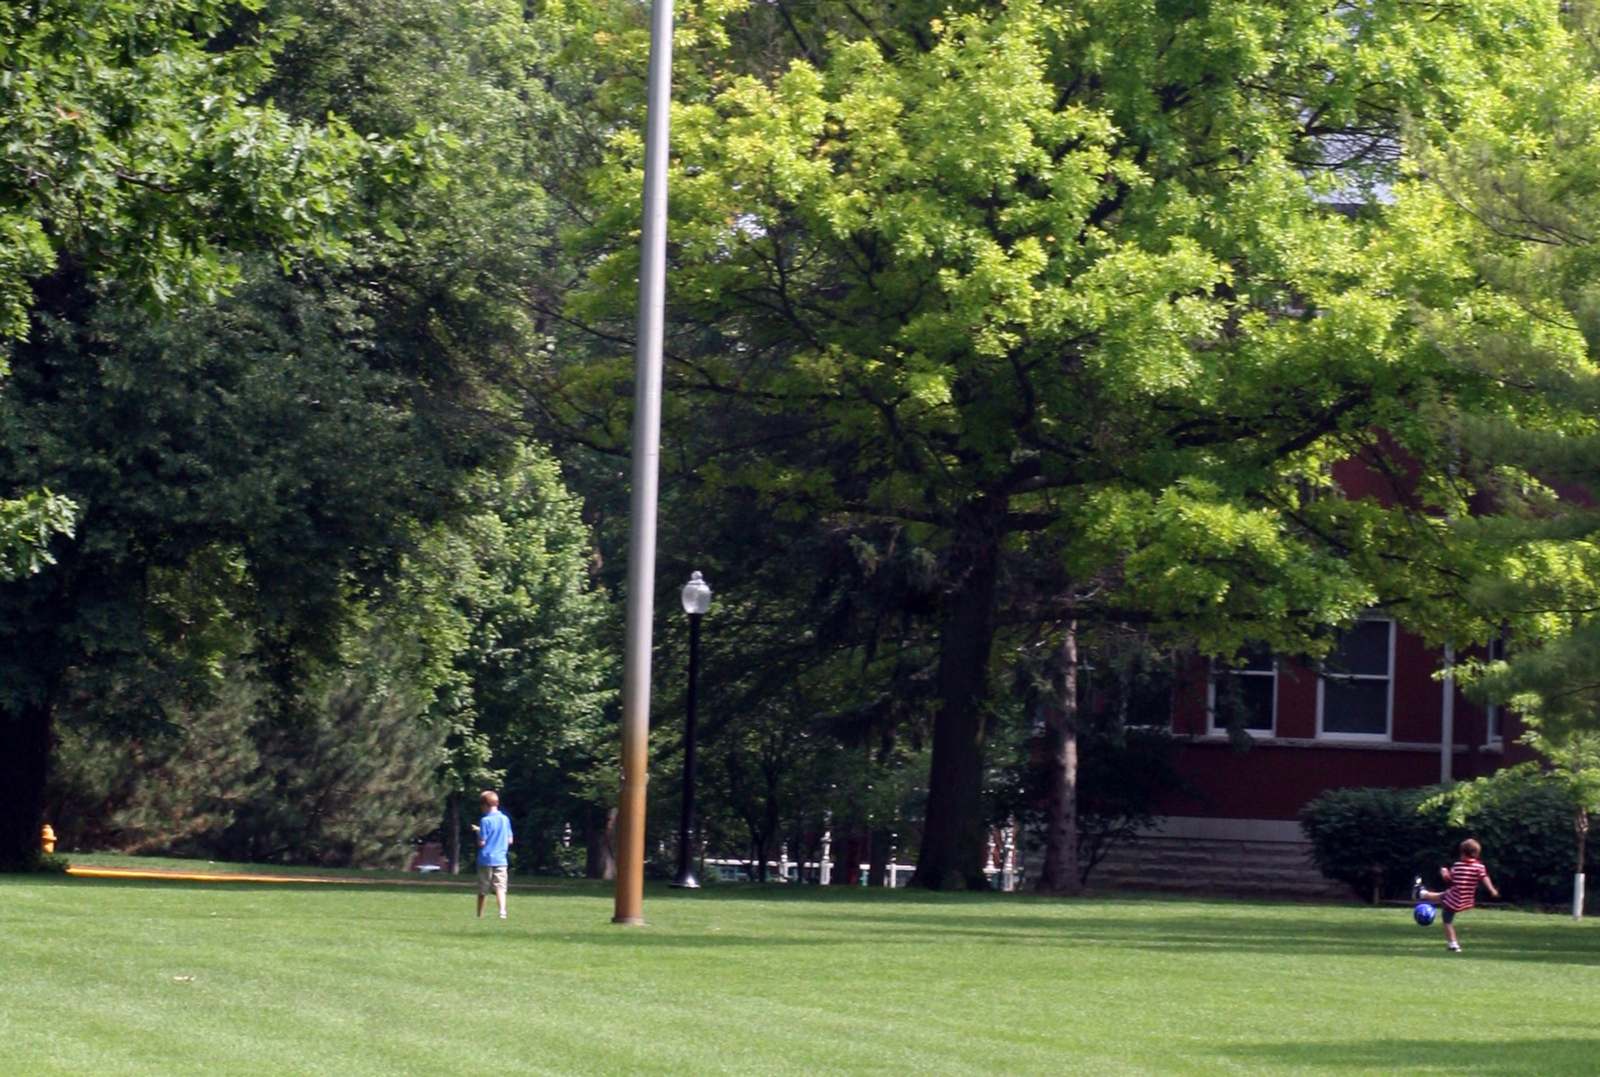 a boy standing in a park